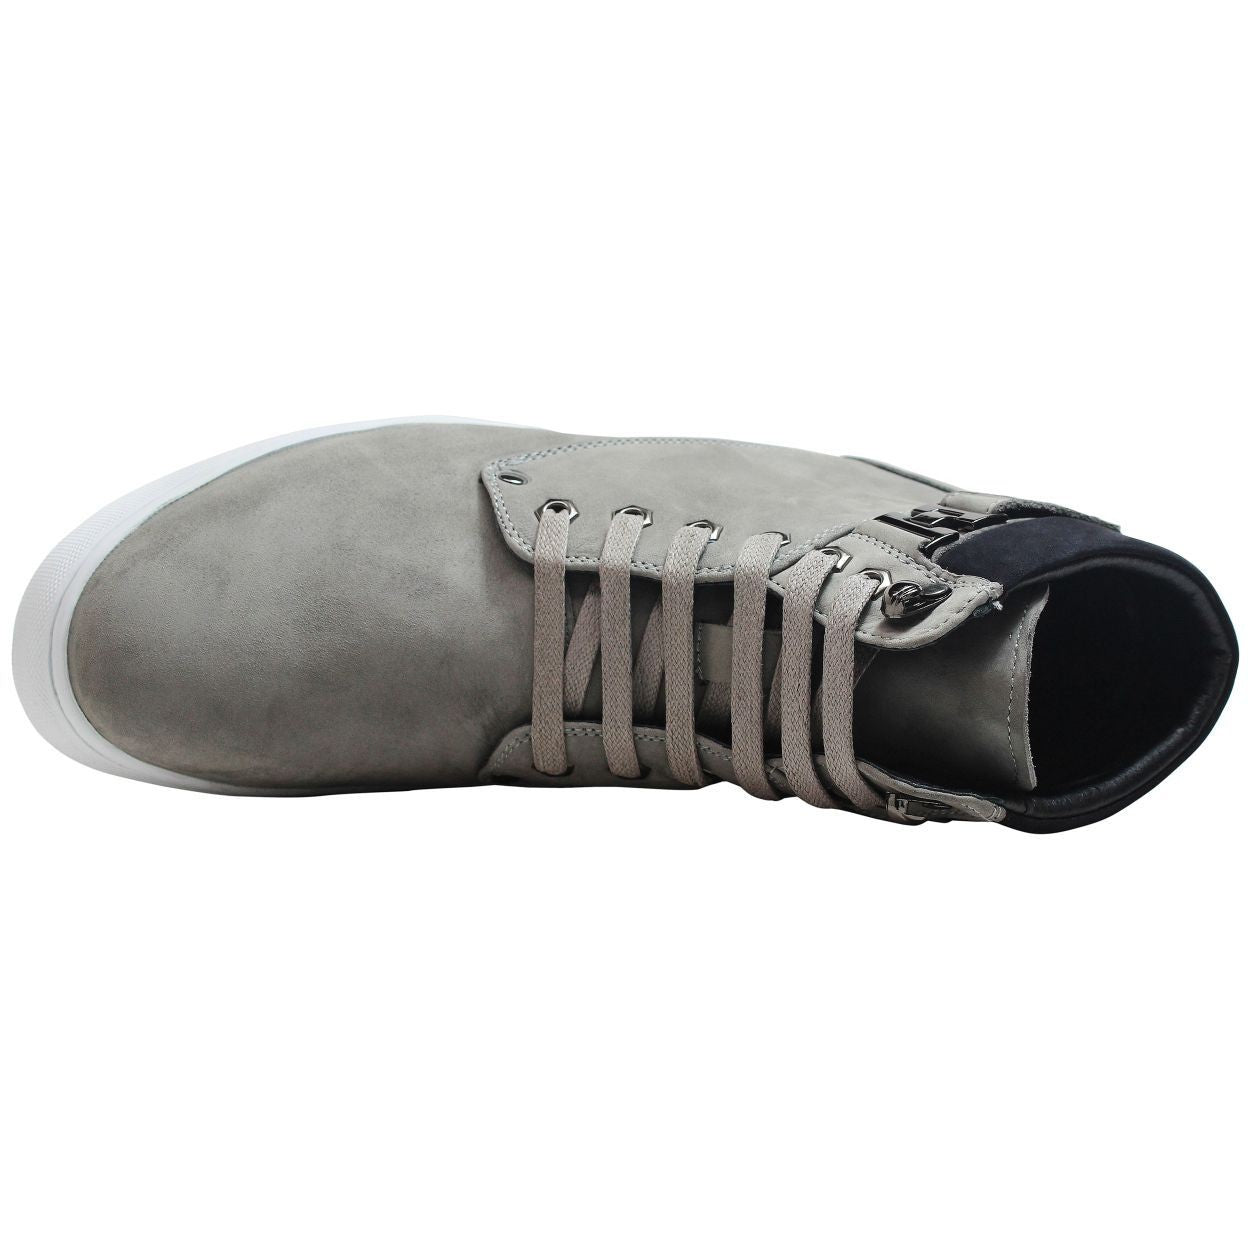 Elevator shoes height increase CALTO - T53120 - 2.6 Inches Taller (Nubuck Grey)